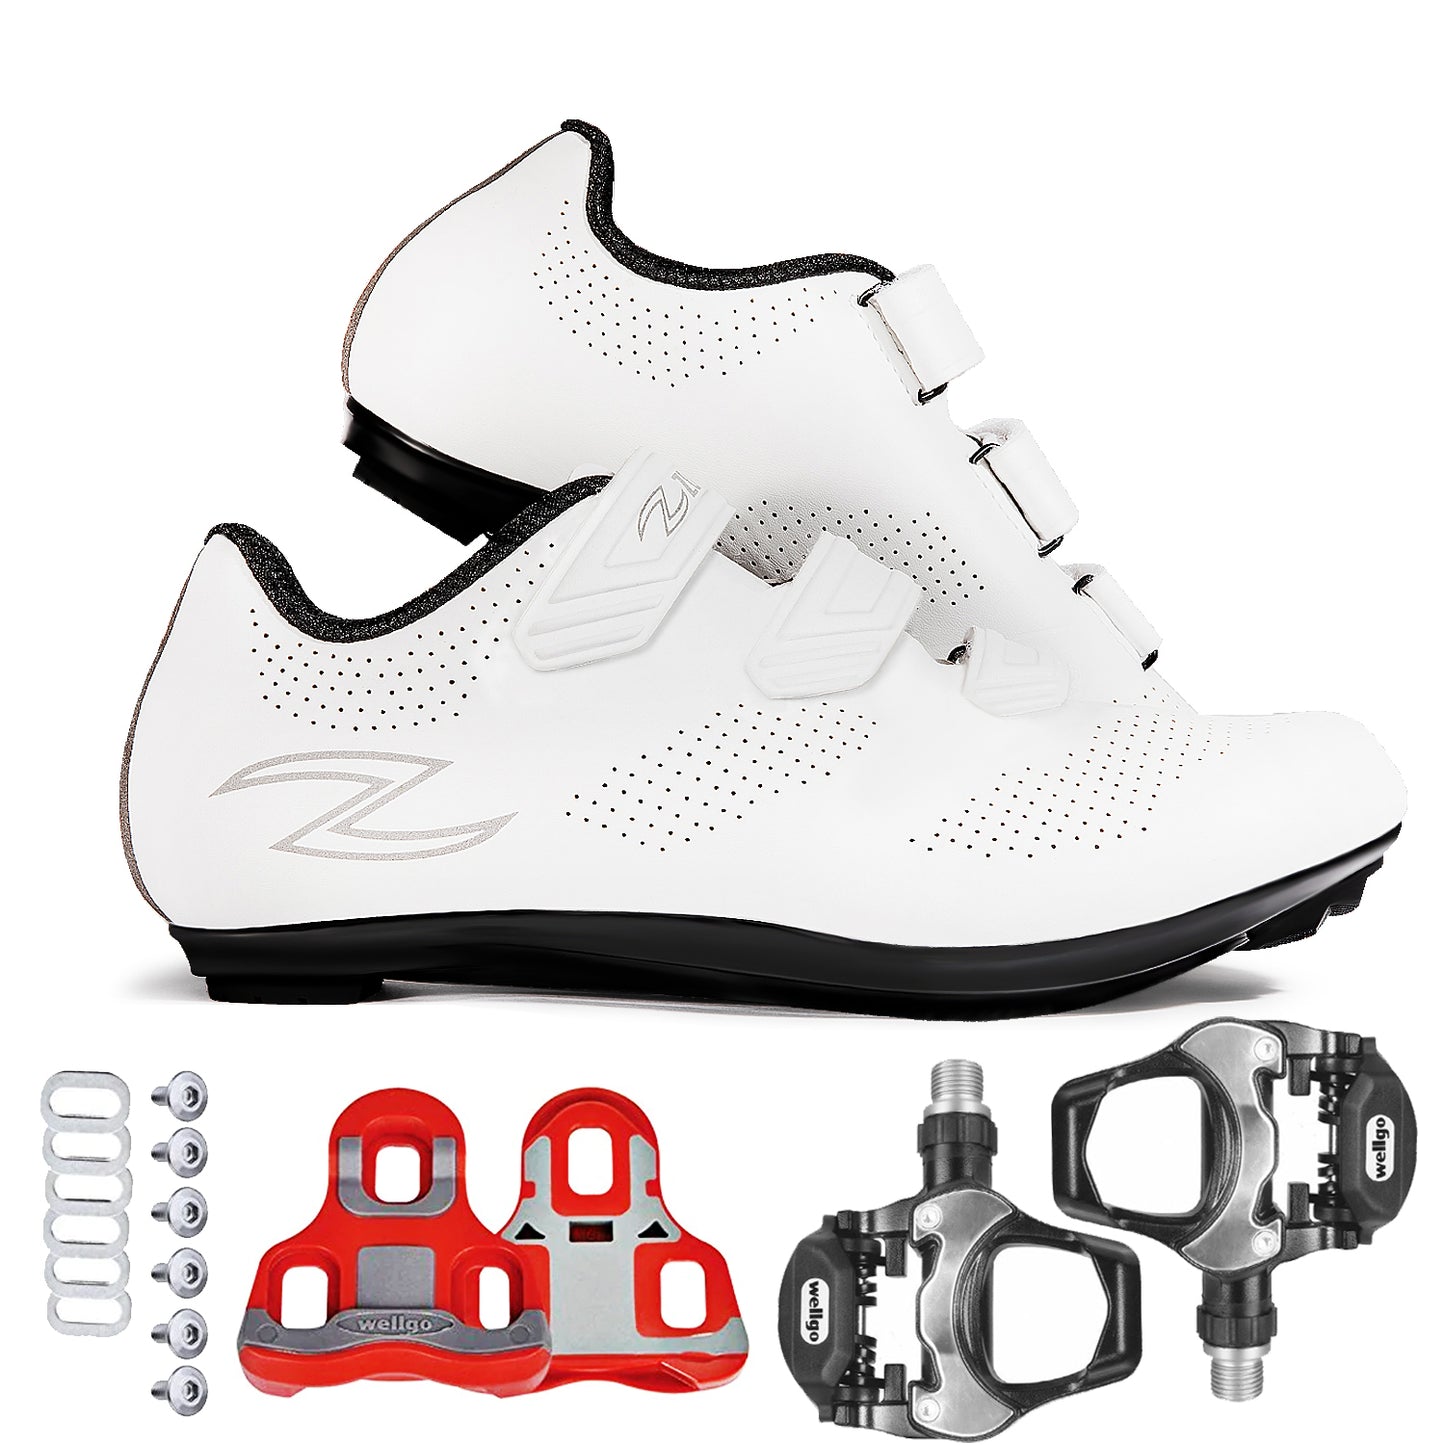 Zol Fondo Road Cycling Shoes with Pedals and Cleats - Zol Cycling